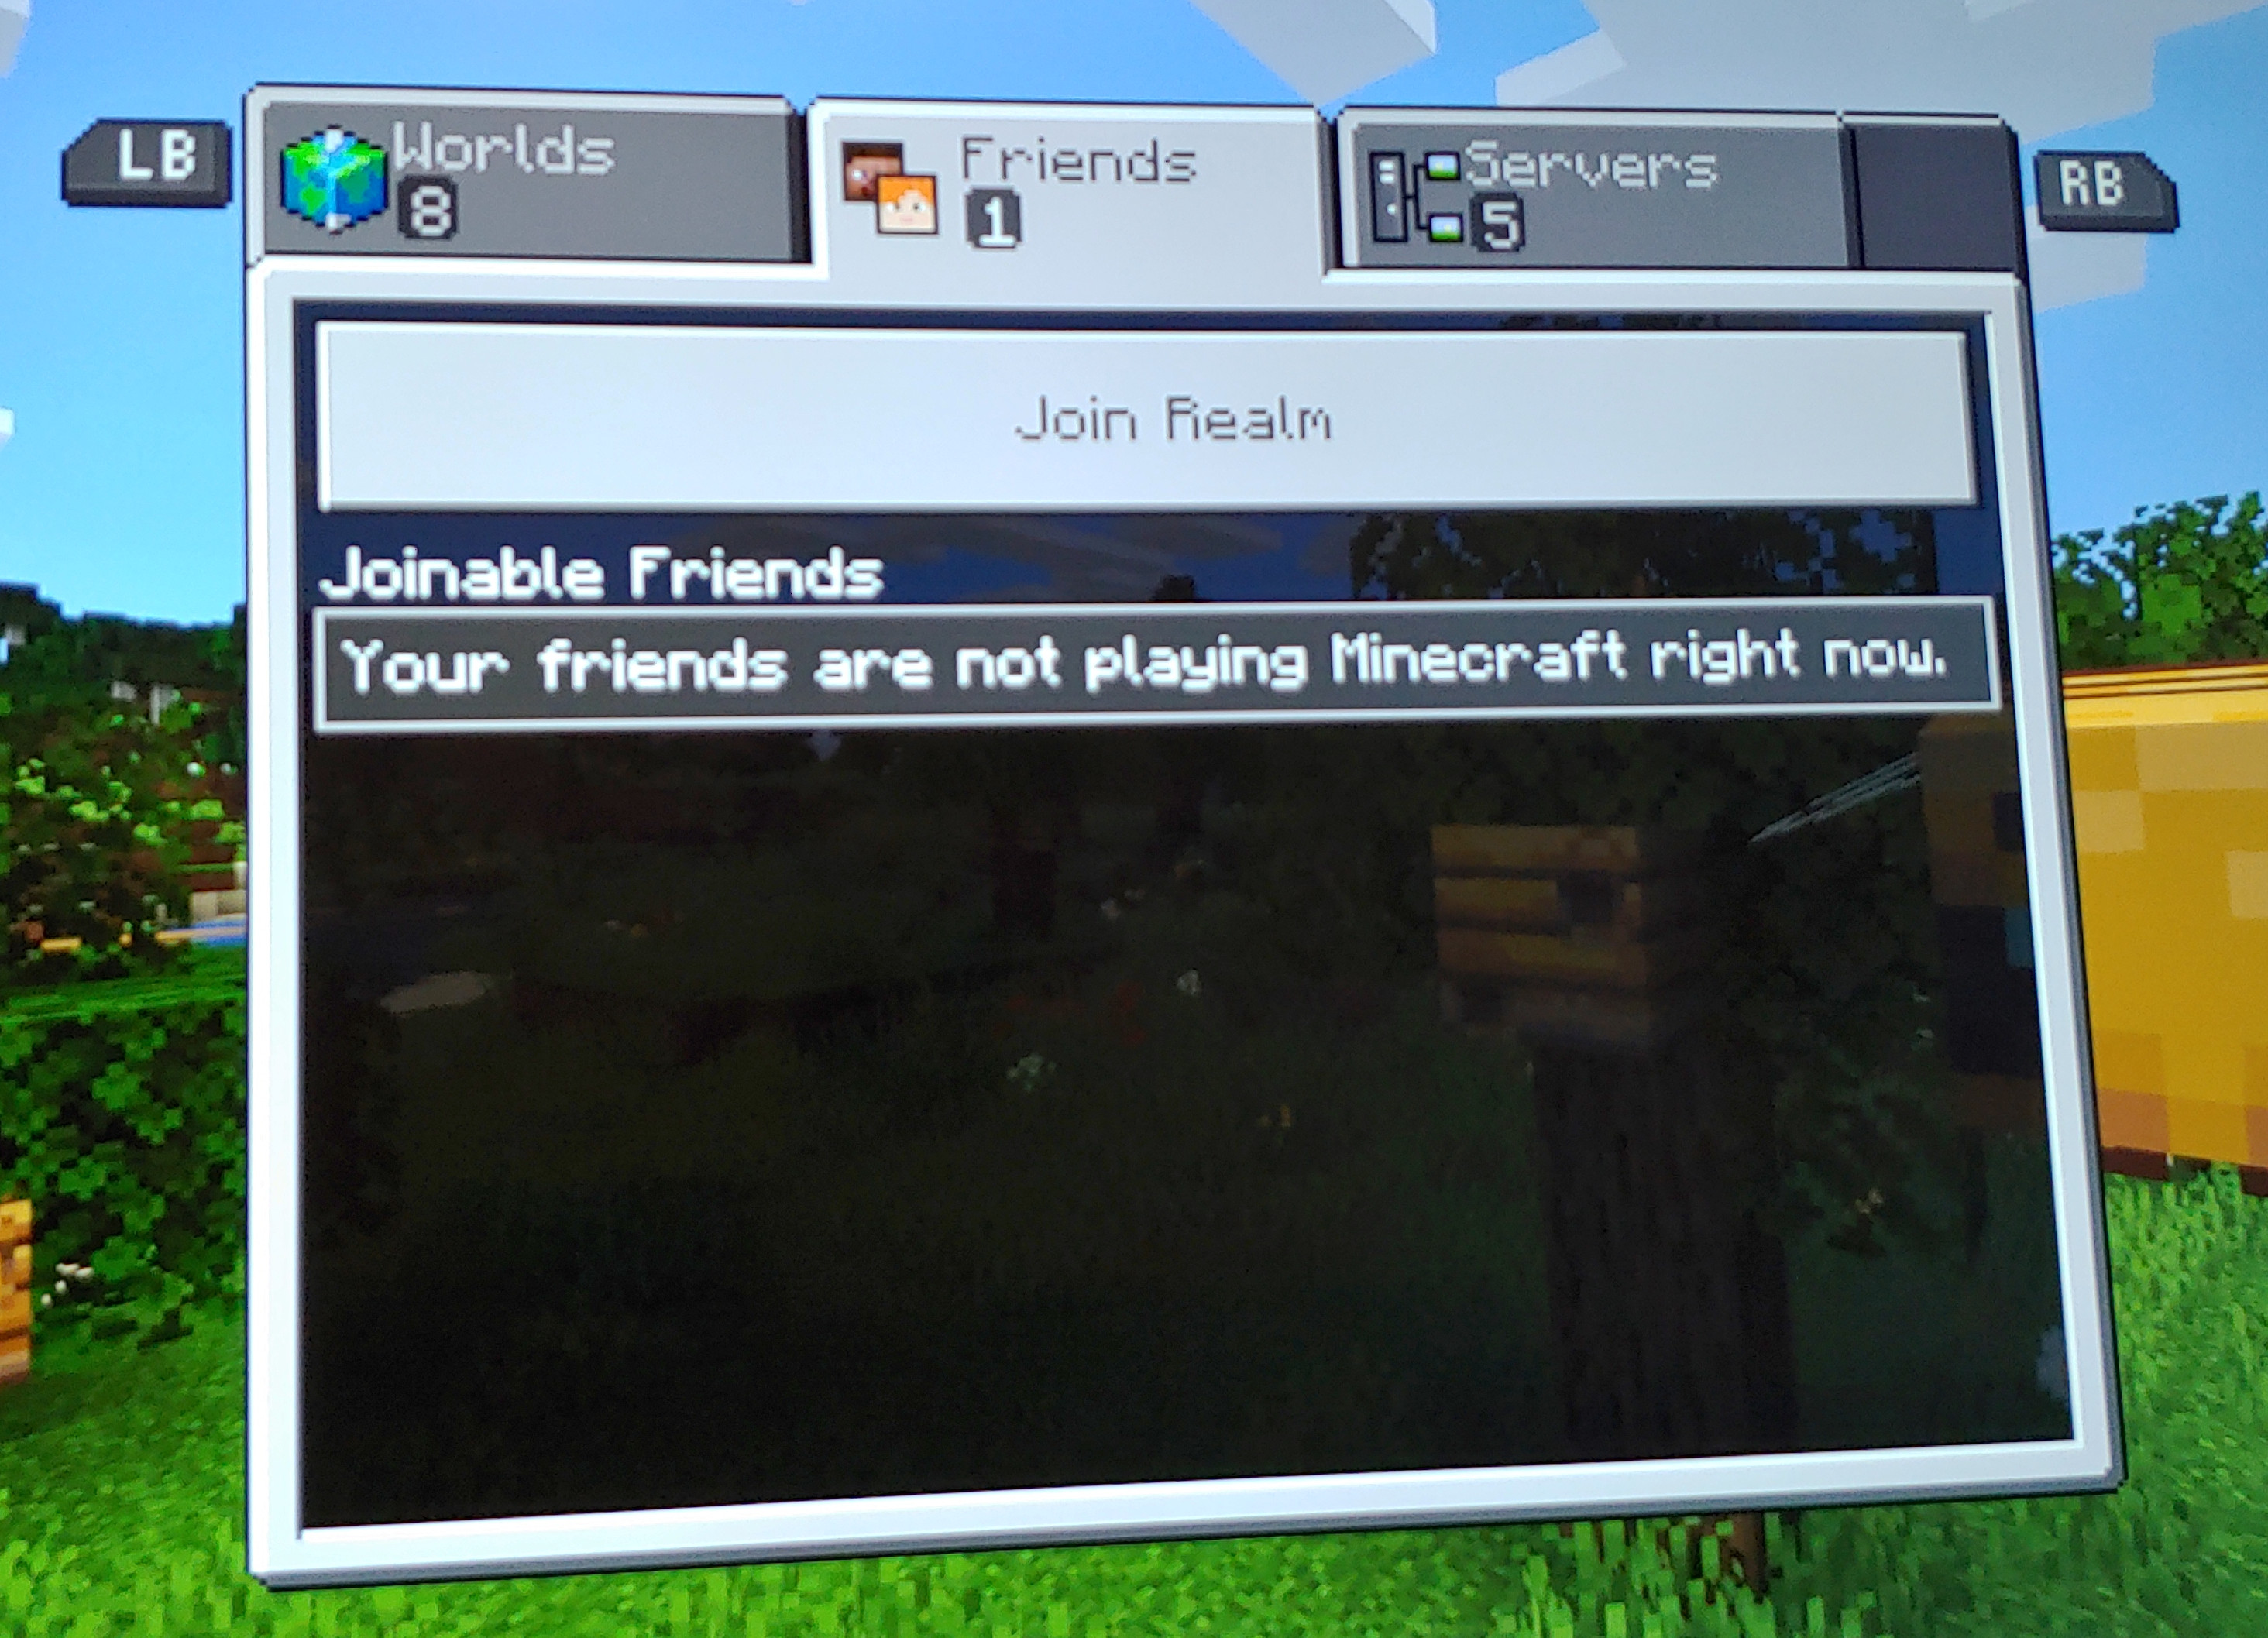 Your friends are not playing Minecraft right now - Microsoft Community